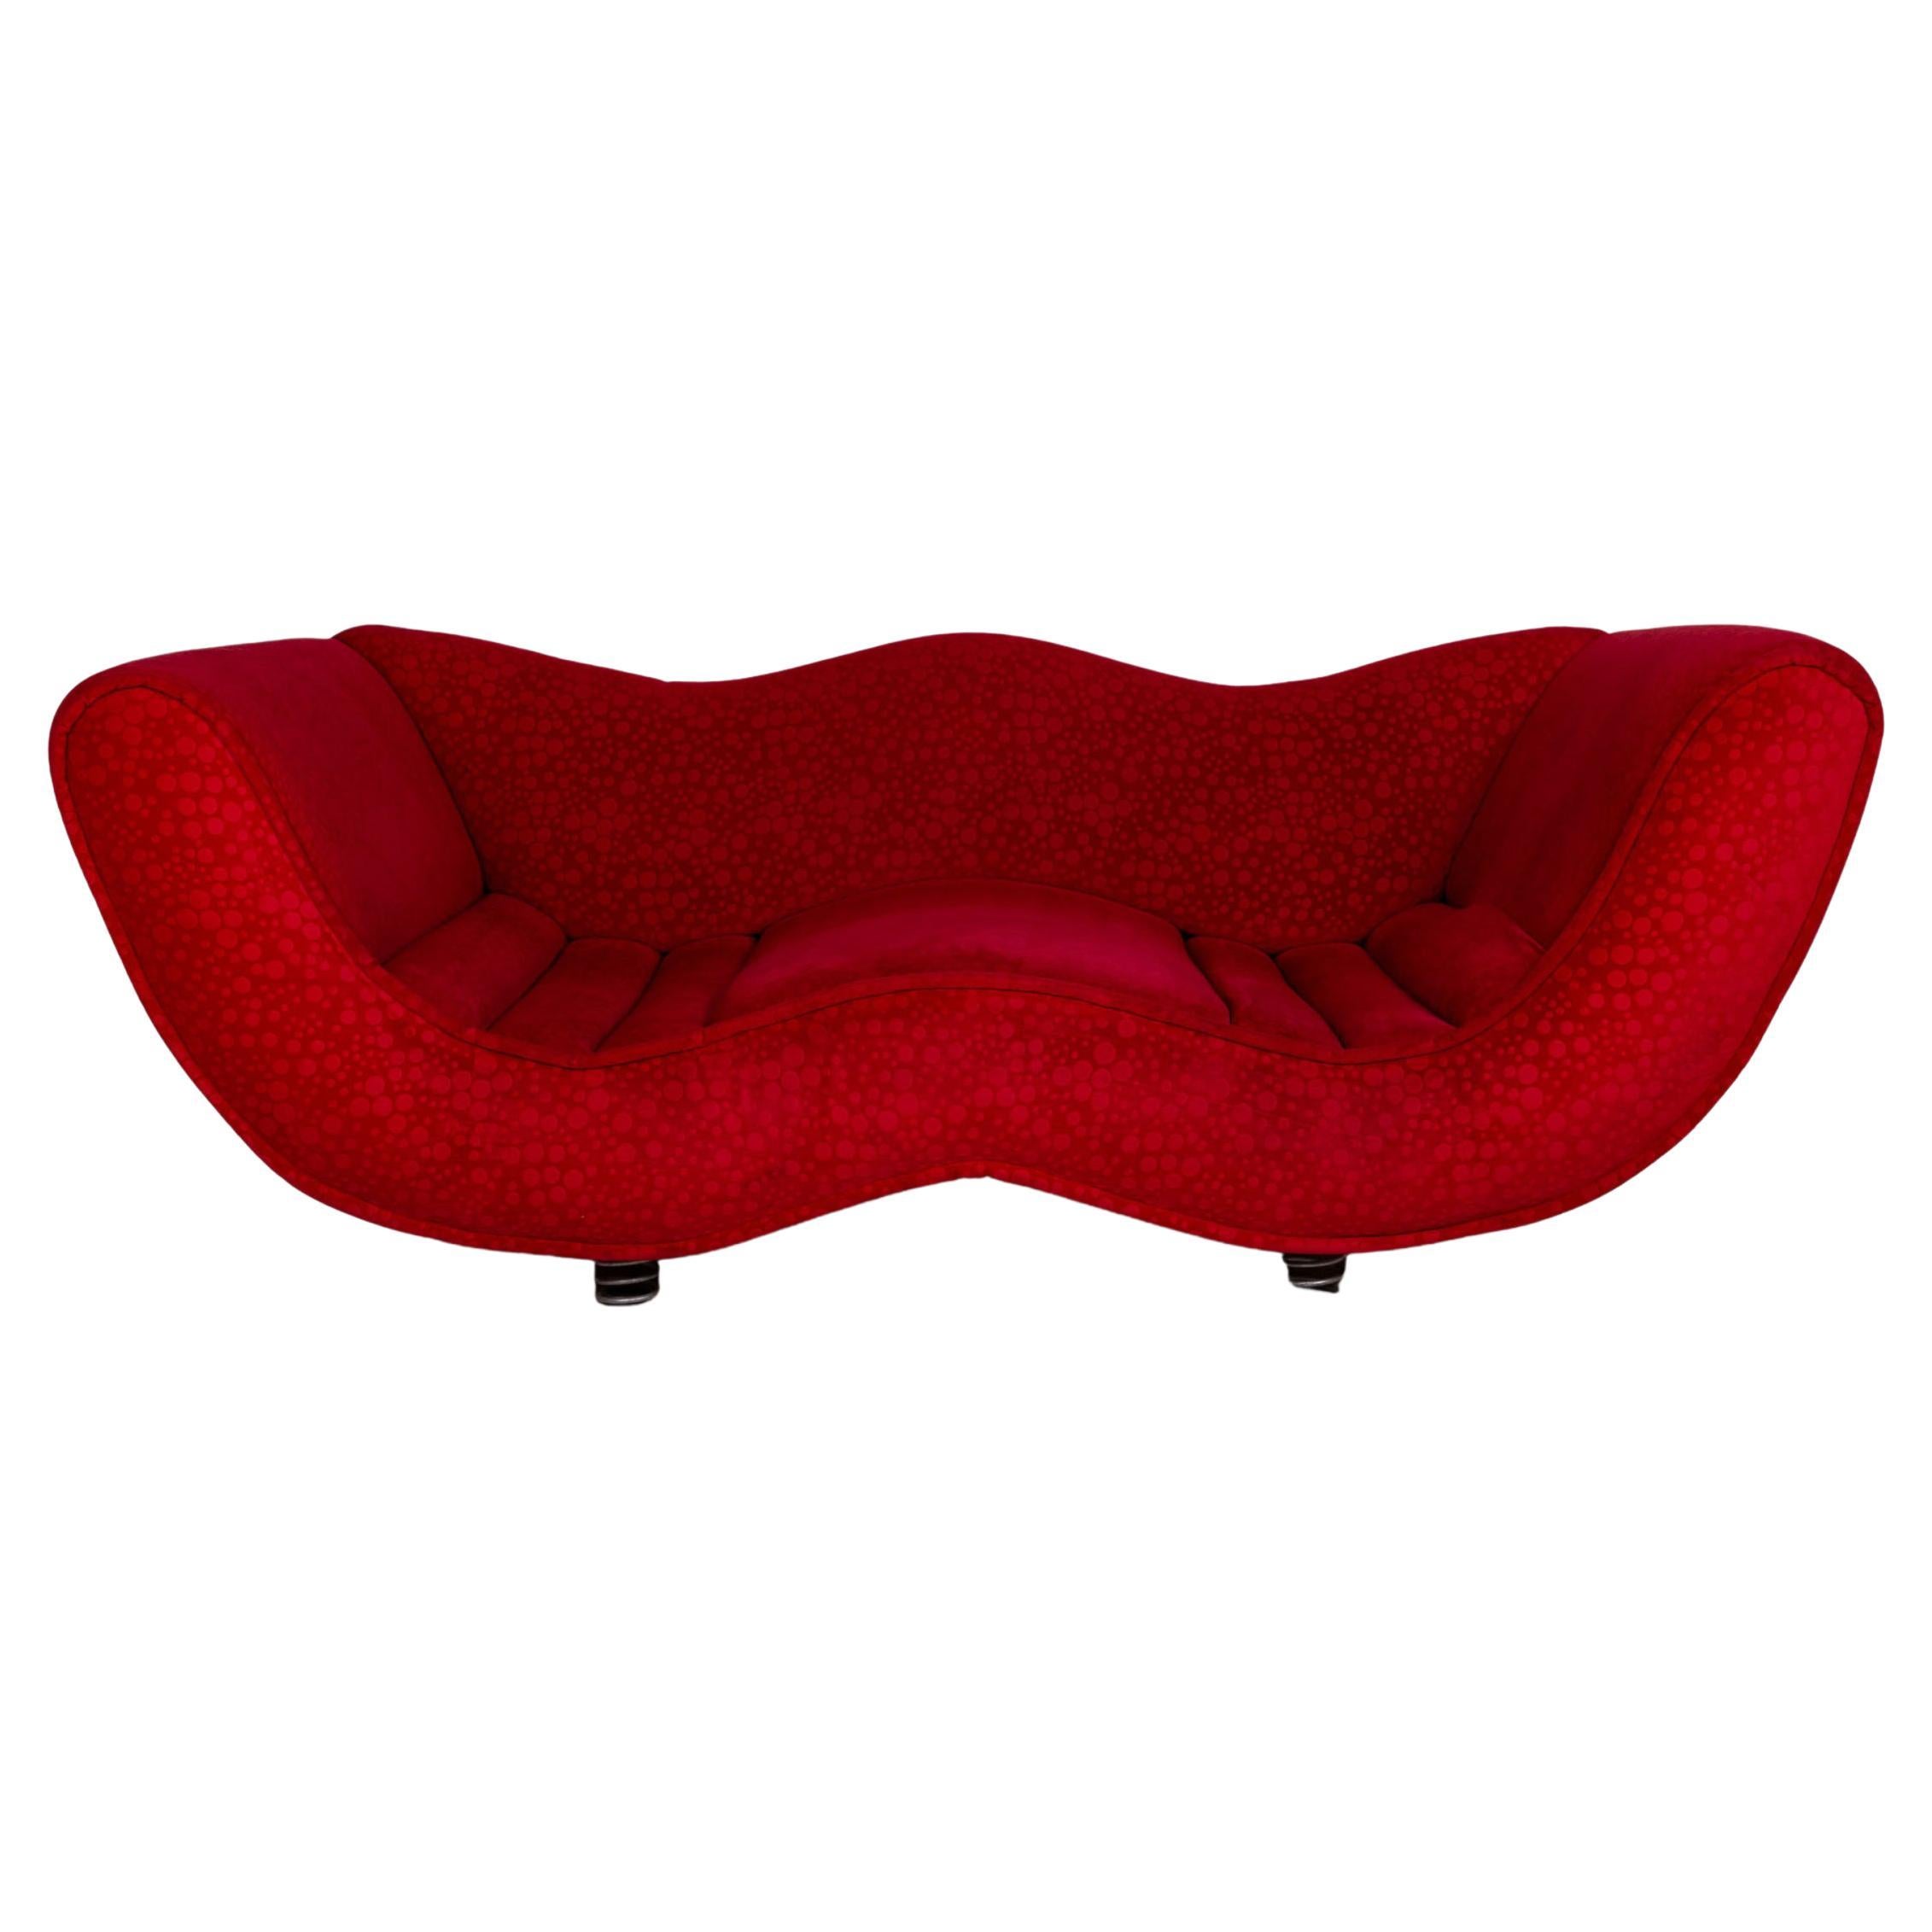 Bretz Laola Hookipa Fabric Sofa Red Two-Seater Couch